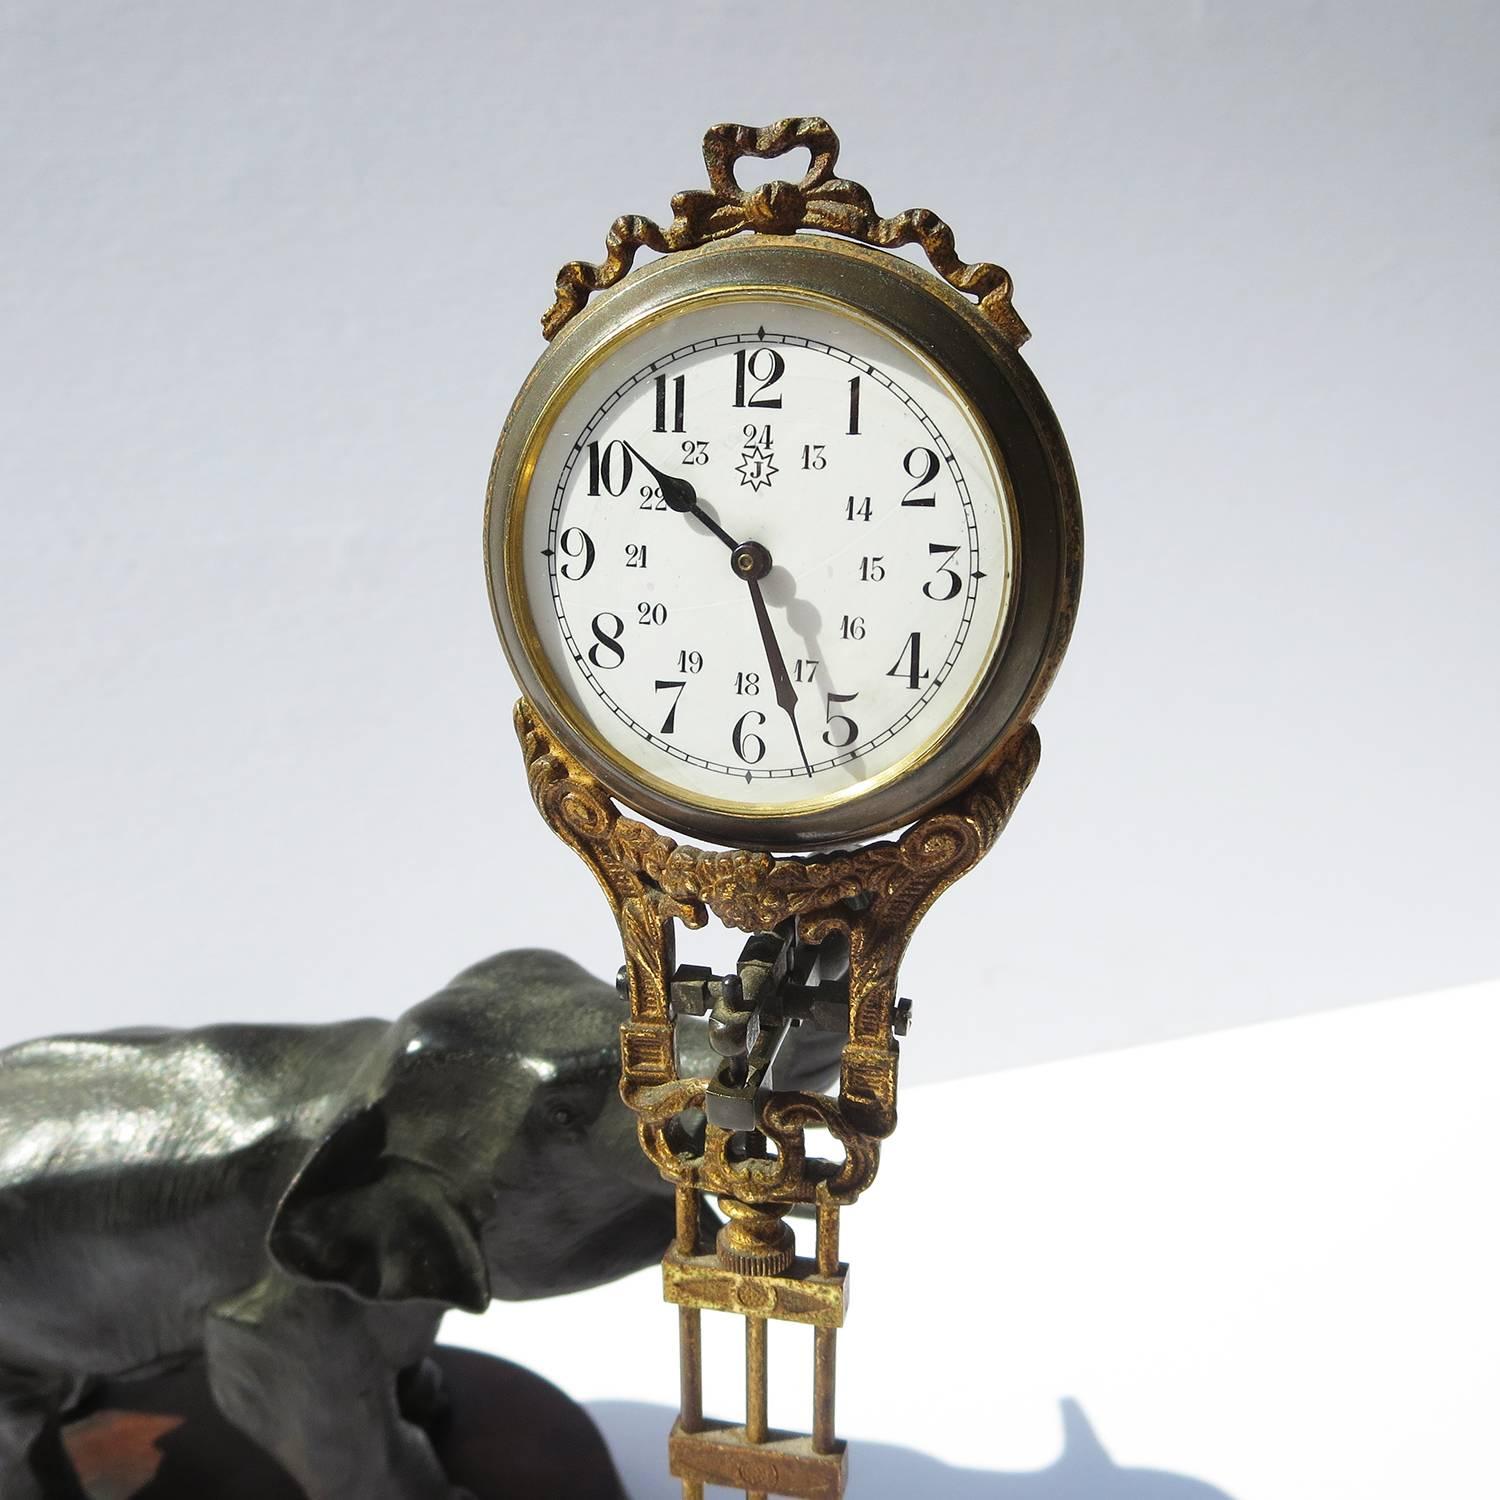 This fantastic clock attests to the European fascination with all things African. The cast bronze elephant is in full trumpeting mode, with upraised trunk and opened mouth. The clock, trimmed in decorative ormolu, gently swings back and forth, in